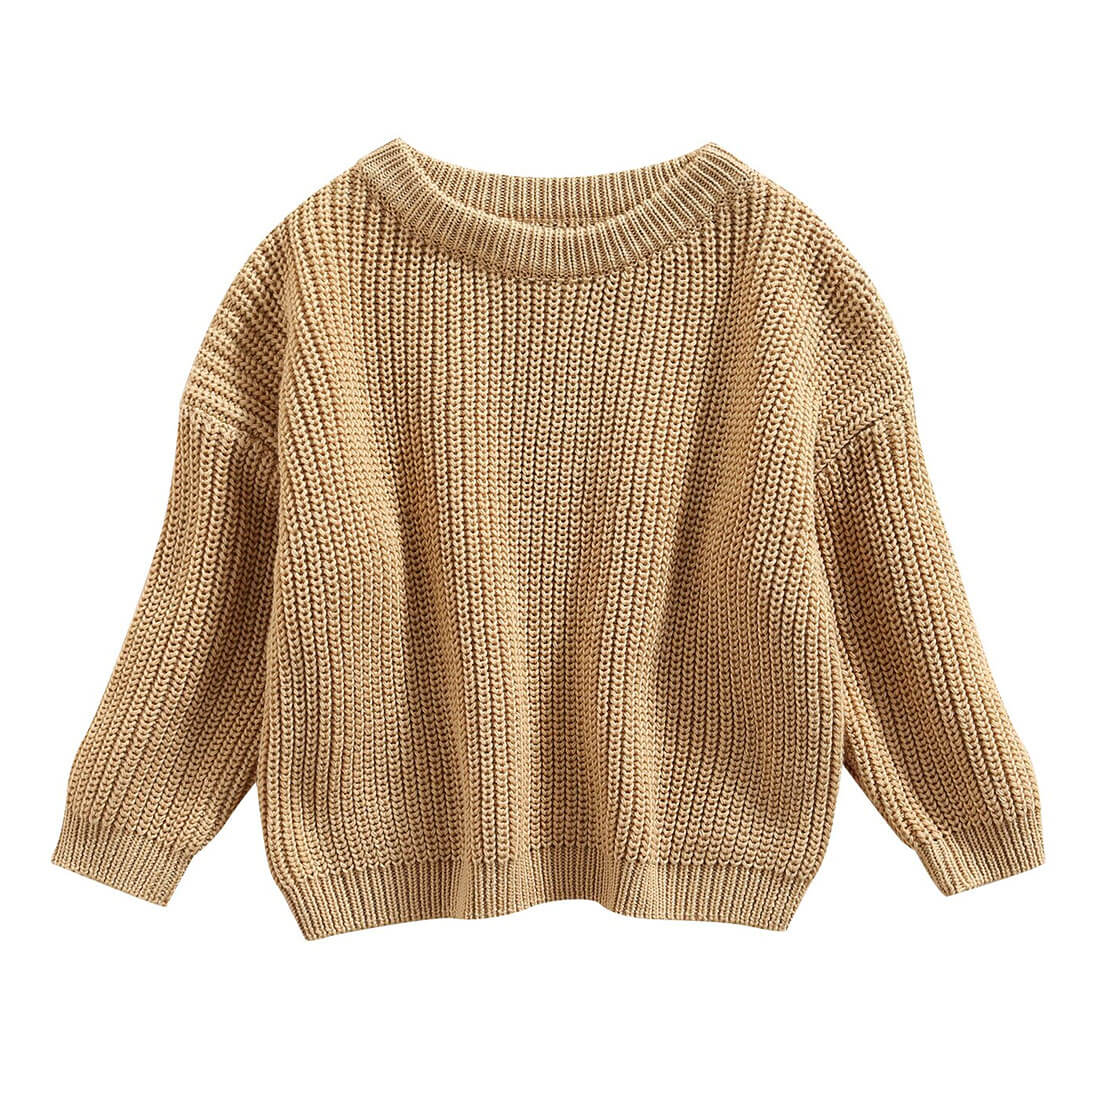 Knitted Solid Sweater Khaki 3-6 M 